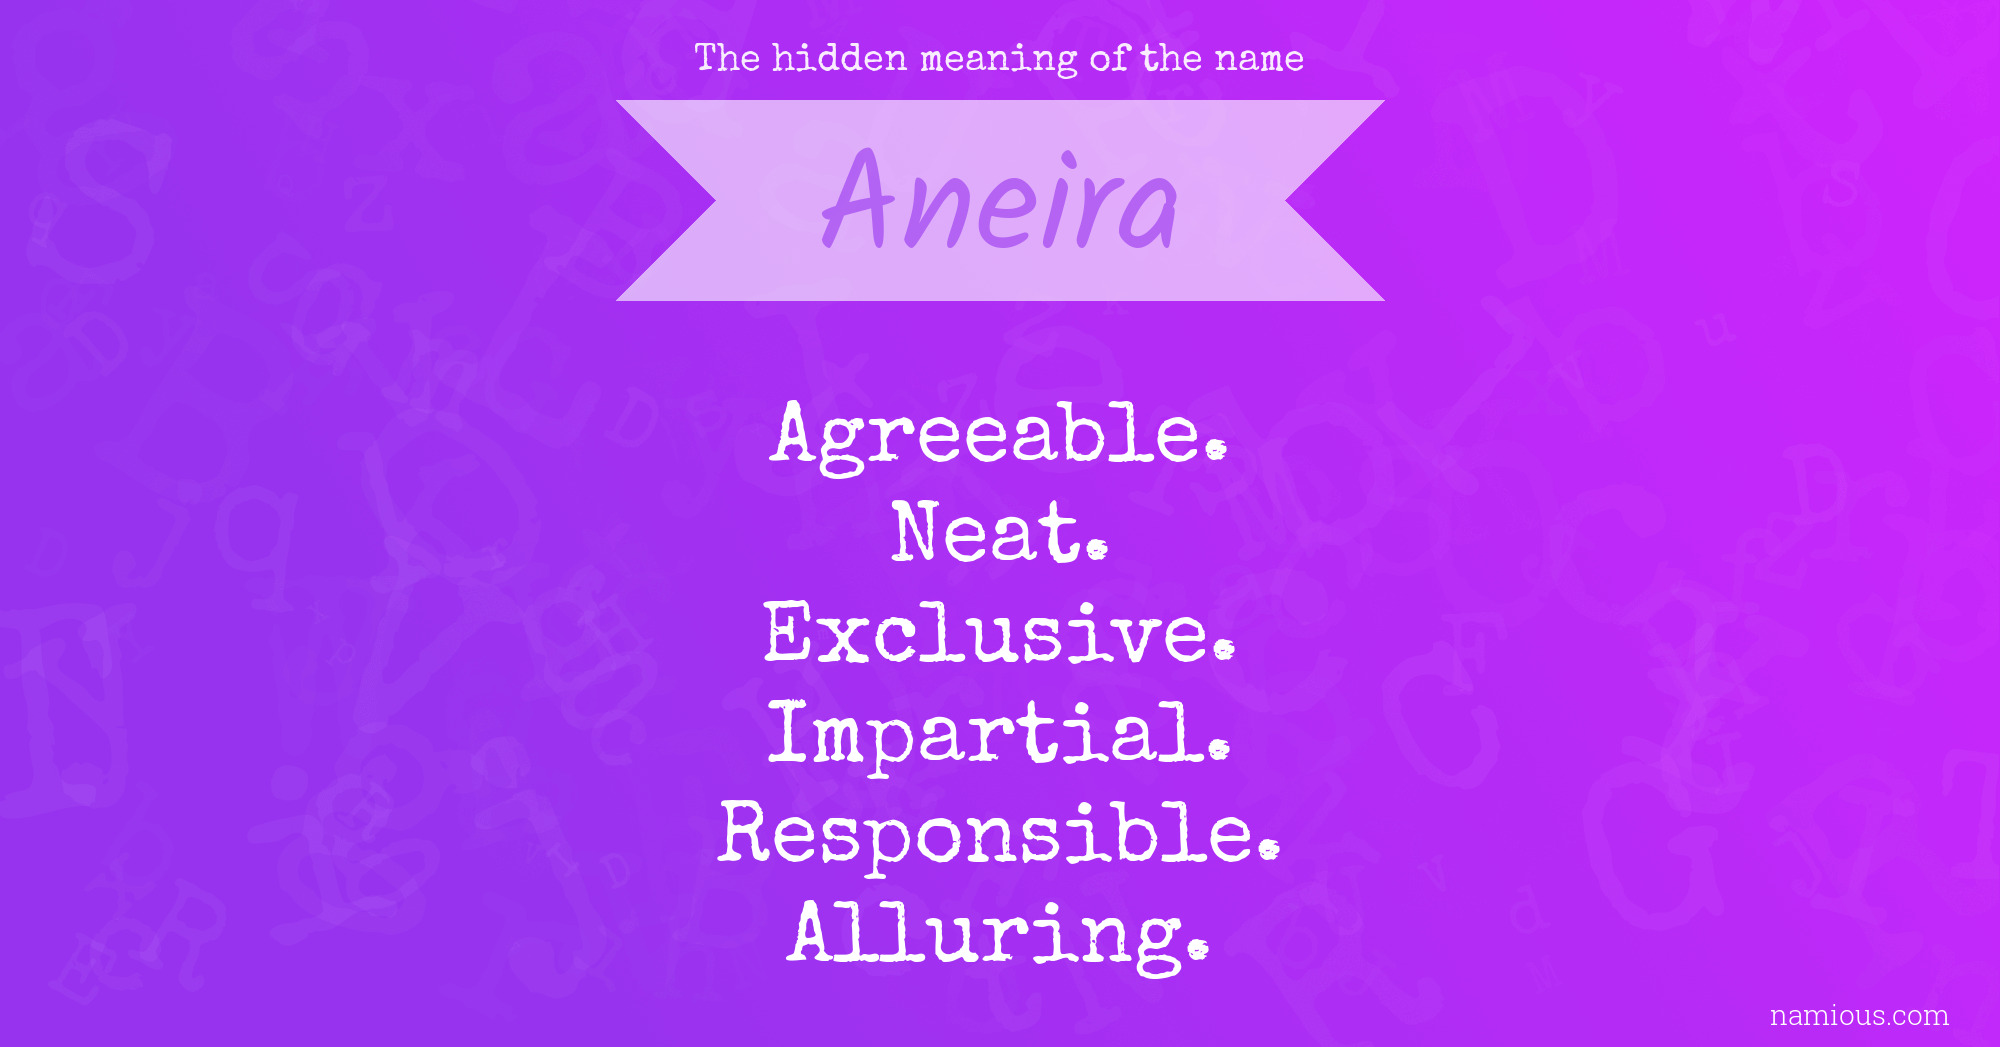 The hidden meaning of the name Aneira